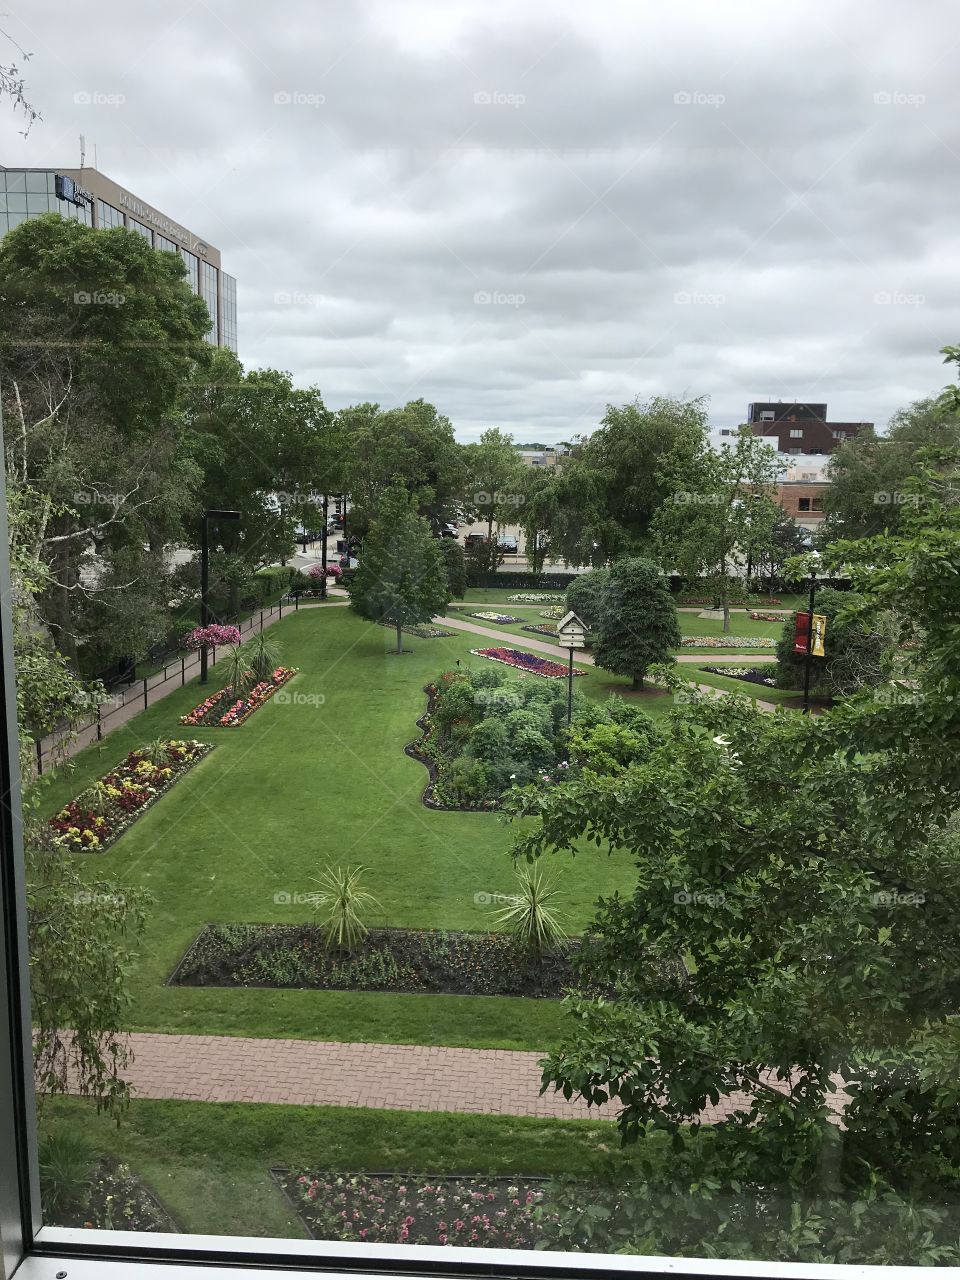 The view of City Hall Park from the Red Deer Public Library third floor window.